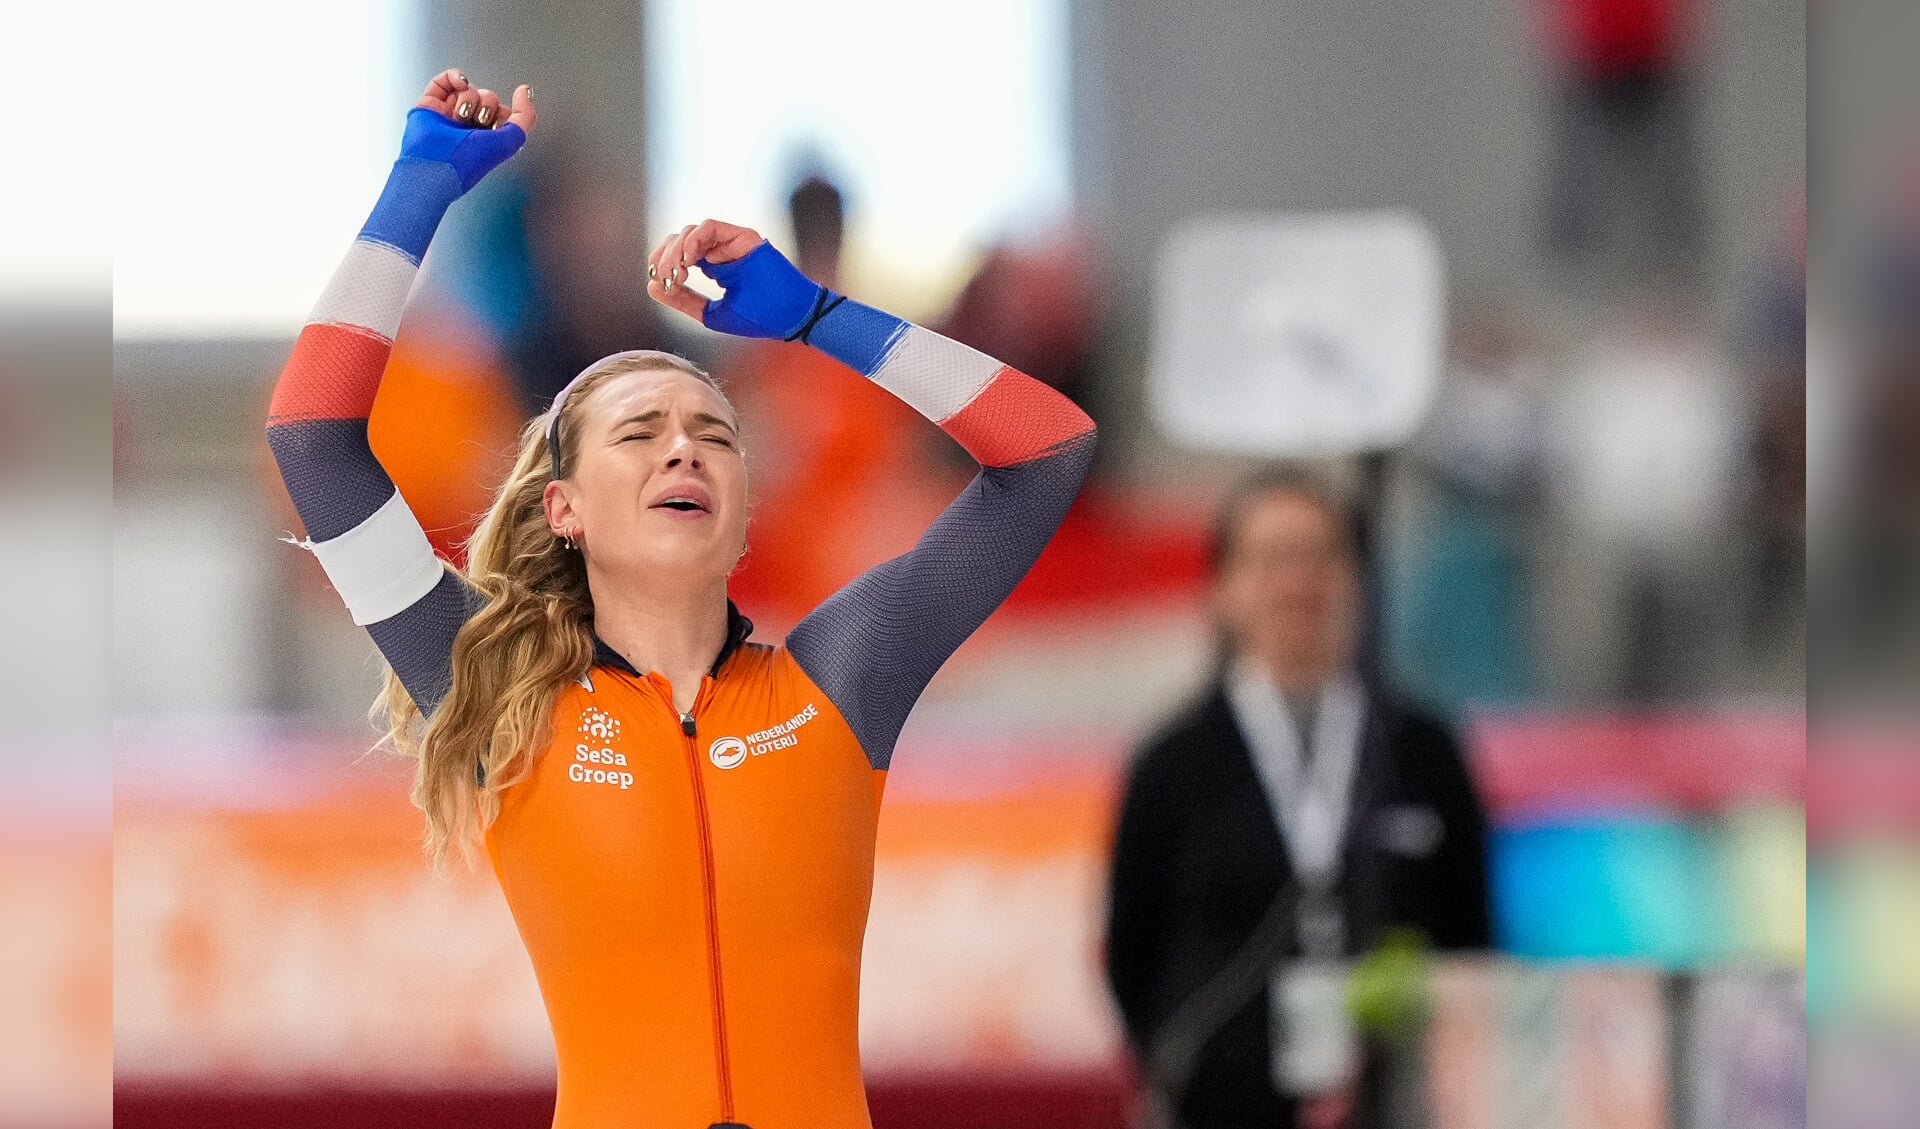 INZELL, GERMANY - MARCH 10: Joy Beune of The Netherlands celebrating her win after competing on the Women's 5000m during the ISU World Speed Skating Allround Championships at Max Aicher Arena on March 10, 2024 in Inzell, Germany. (Photo by Douwe Bijlsma/Orange Pictures)